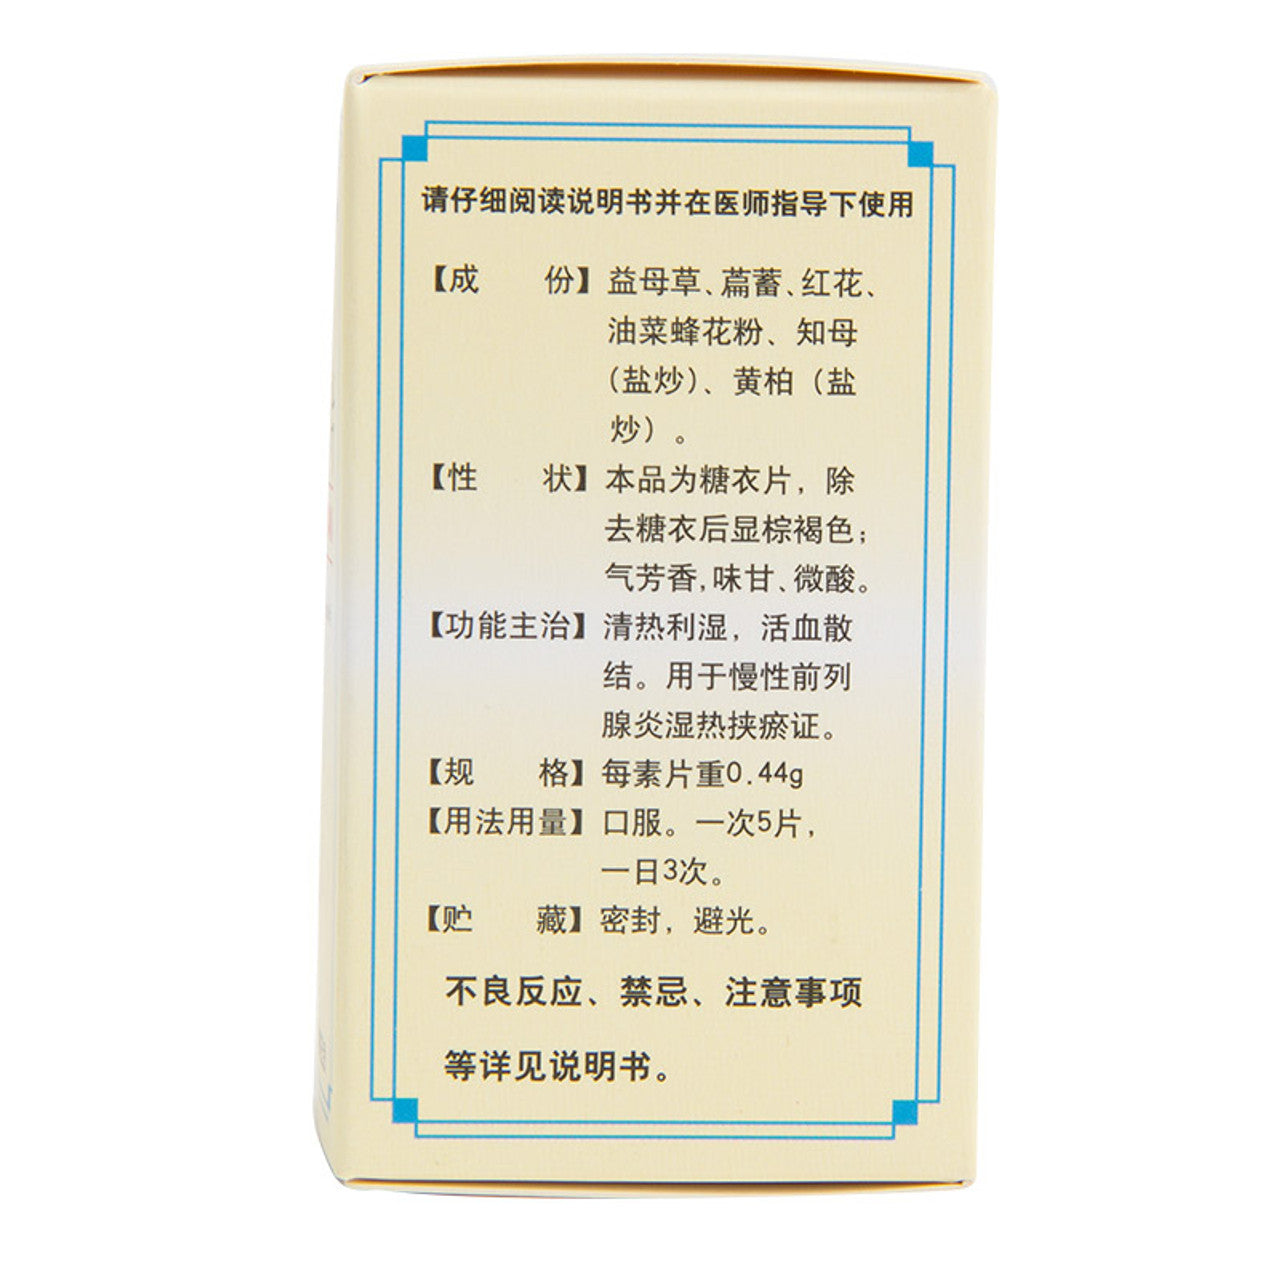 (0.44g*60 Tablets*5 boxes/lots). QIANLIETAIPIAN or Qianlietai Pian or Qianlietai Tablets For Prostatitis.